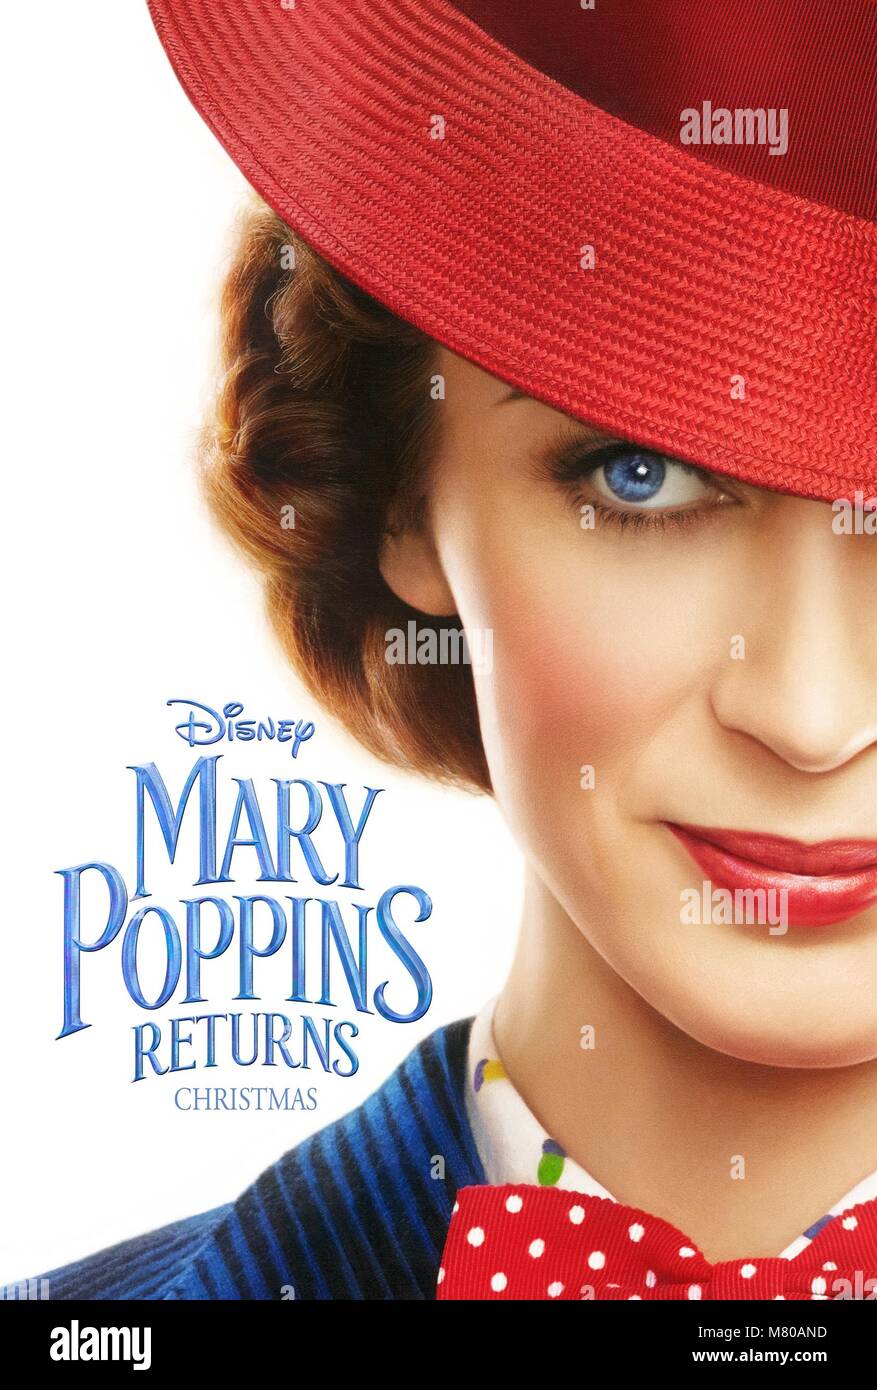 RELEASE DATE: December 25, 2018 TITLE: Mary Poppins Returns STUDIO: Walt Disney Pictures DIRECTOR: Rob Marshall PLOT: In Depression-era London, a now-grown Jane and Michael Banks, along with Michael's three children, are visited by the enigmatic Mary Poppins following a personal loss. STARRING: Emily Blunt as Mary Poppins Poster Art. (Credit Image: © Walt Disney Pictures/Entertainment Pictures) Stock Photo